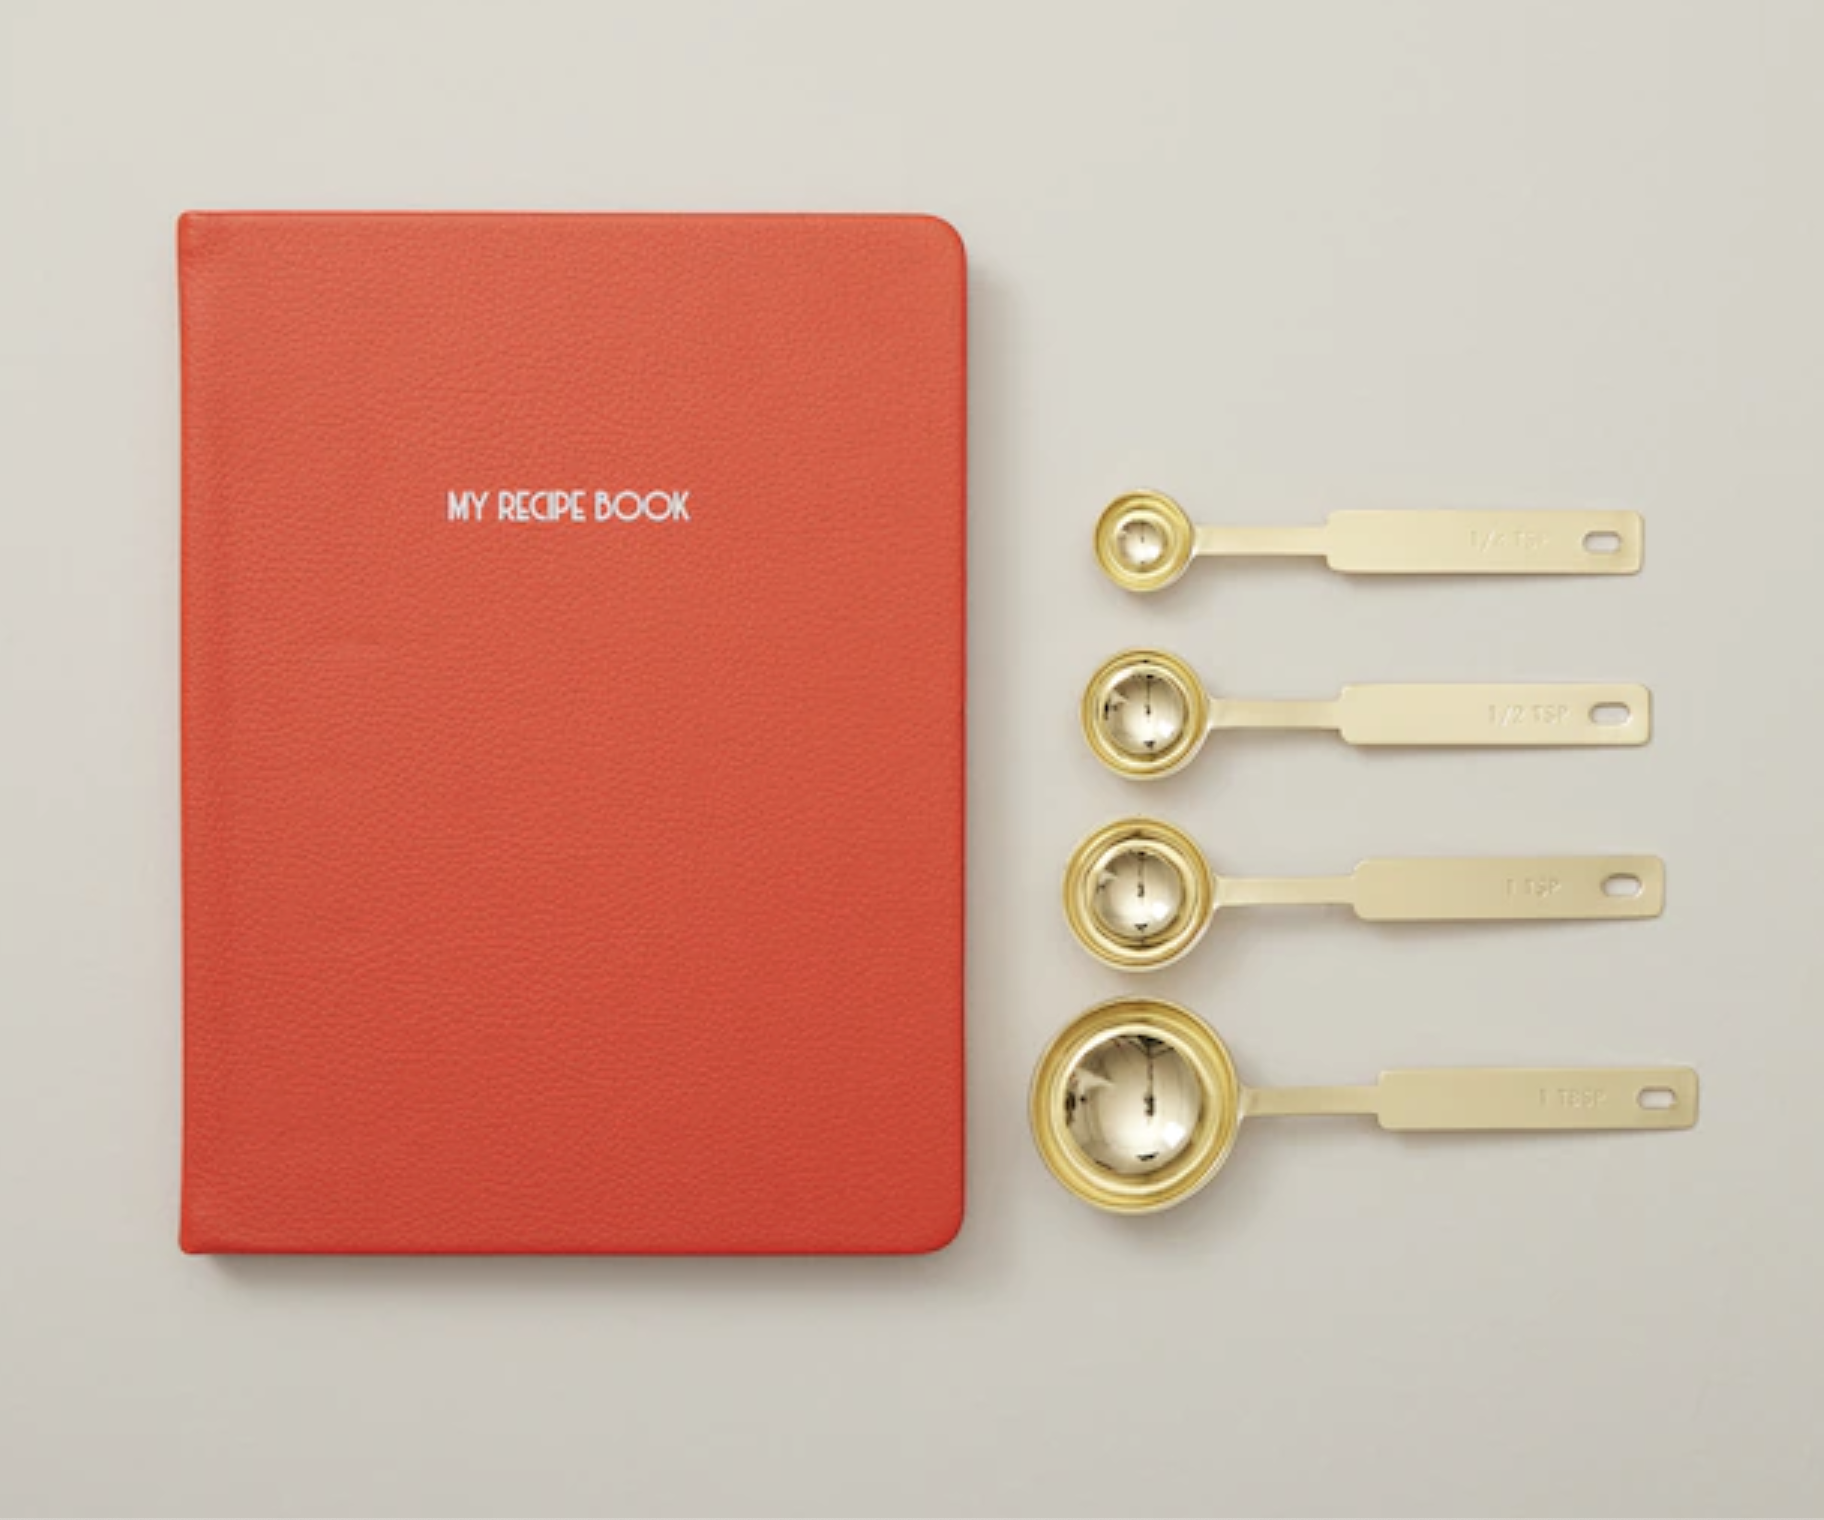 The measuring spoons next to the recipe book